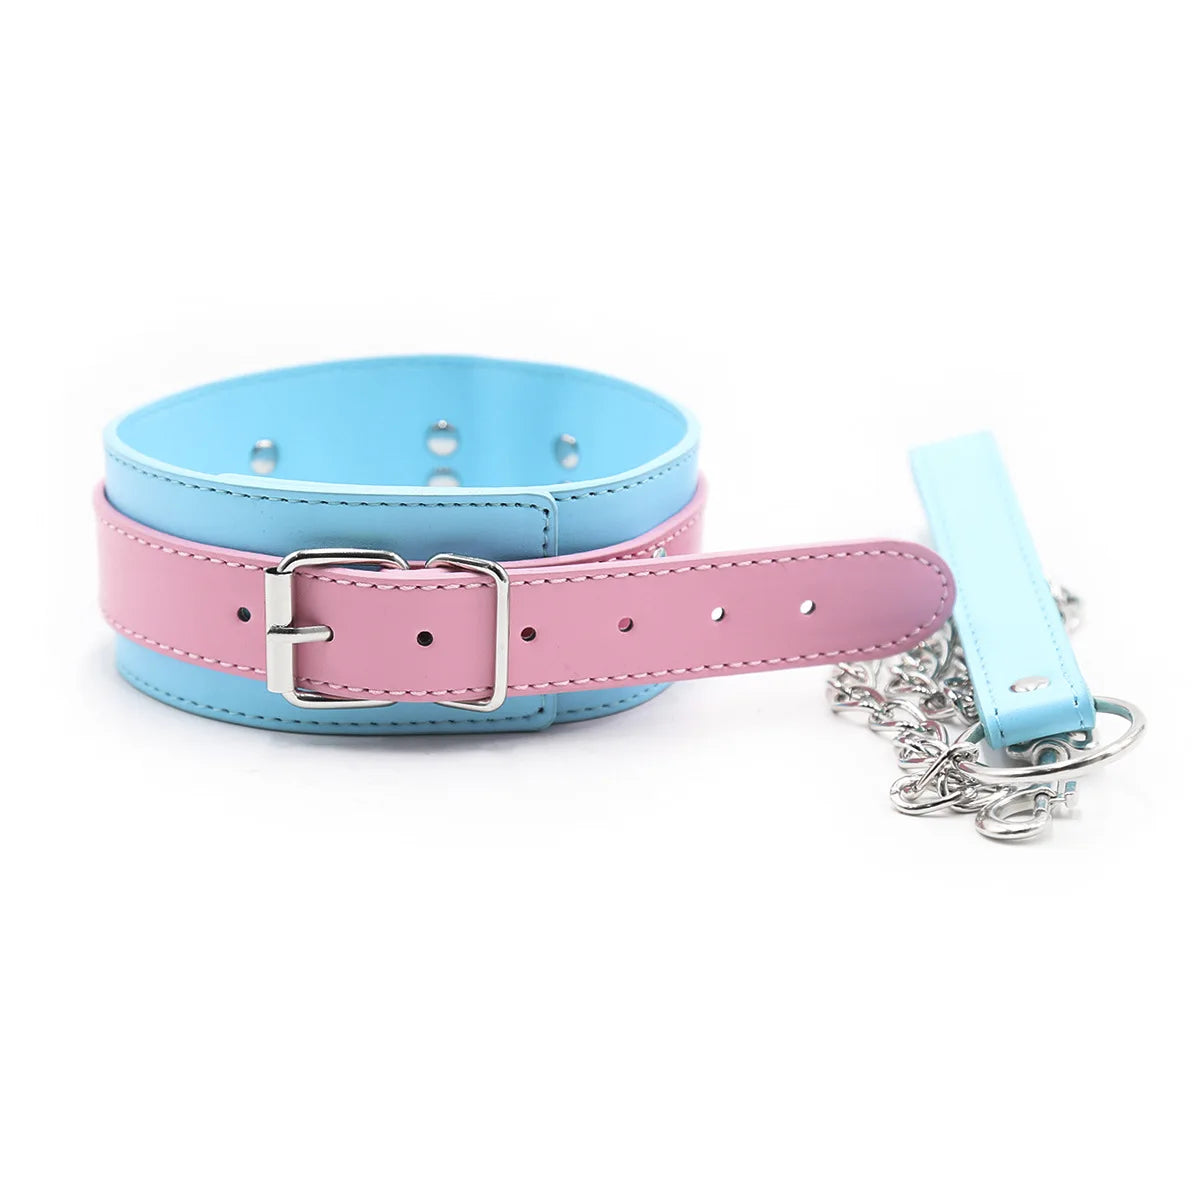 a pink and blue dog collar and leash